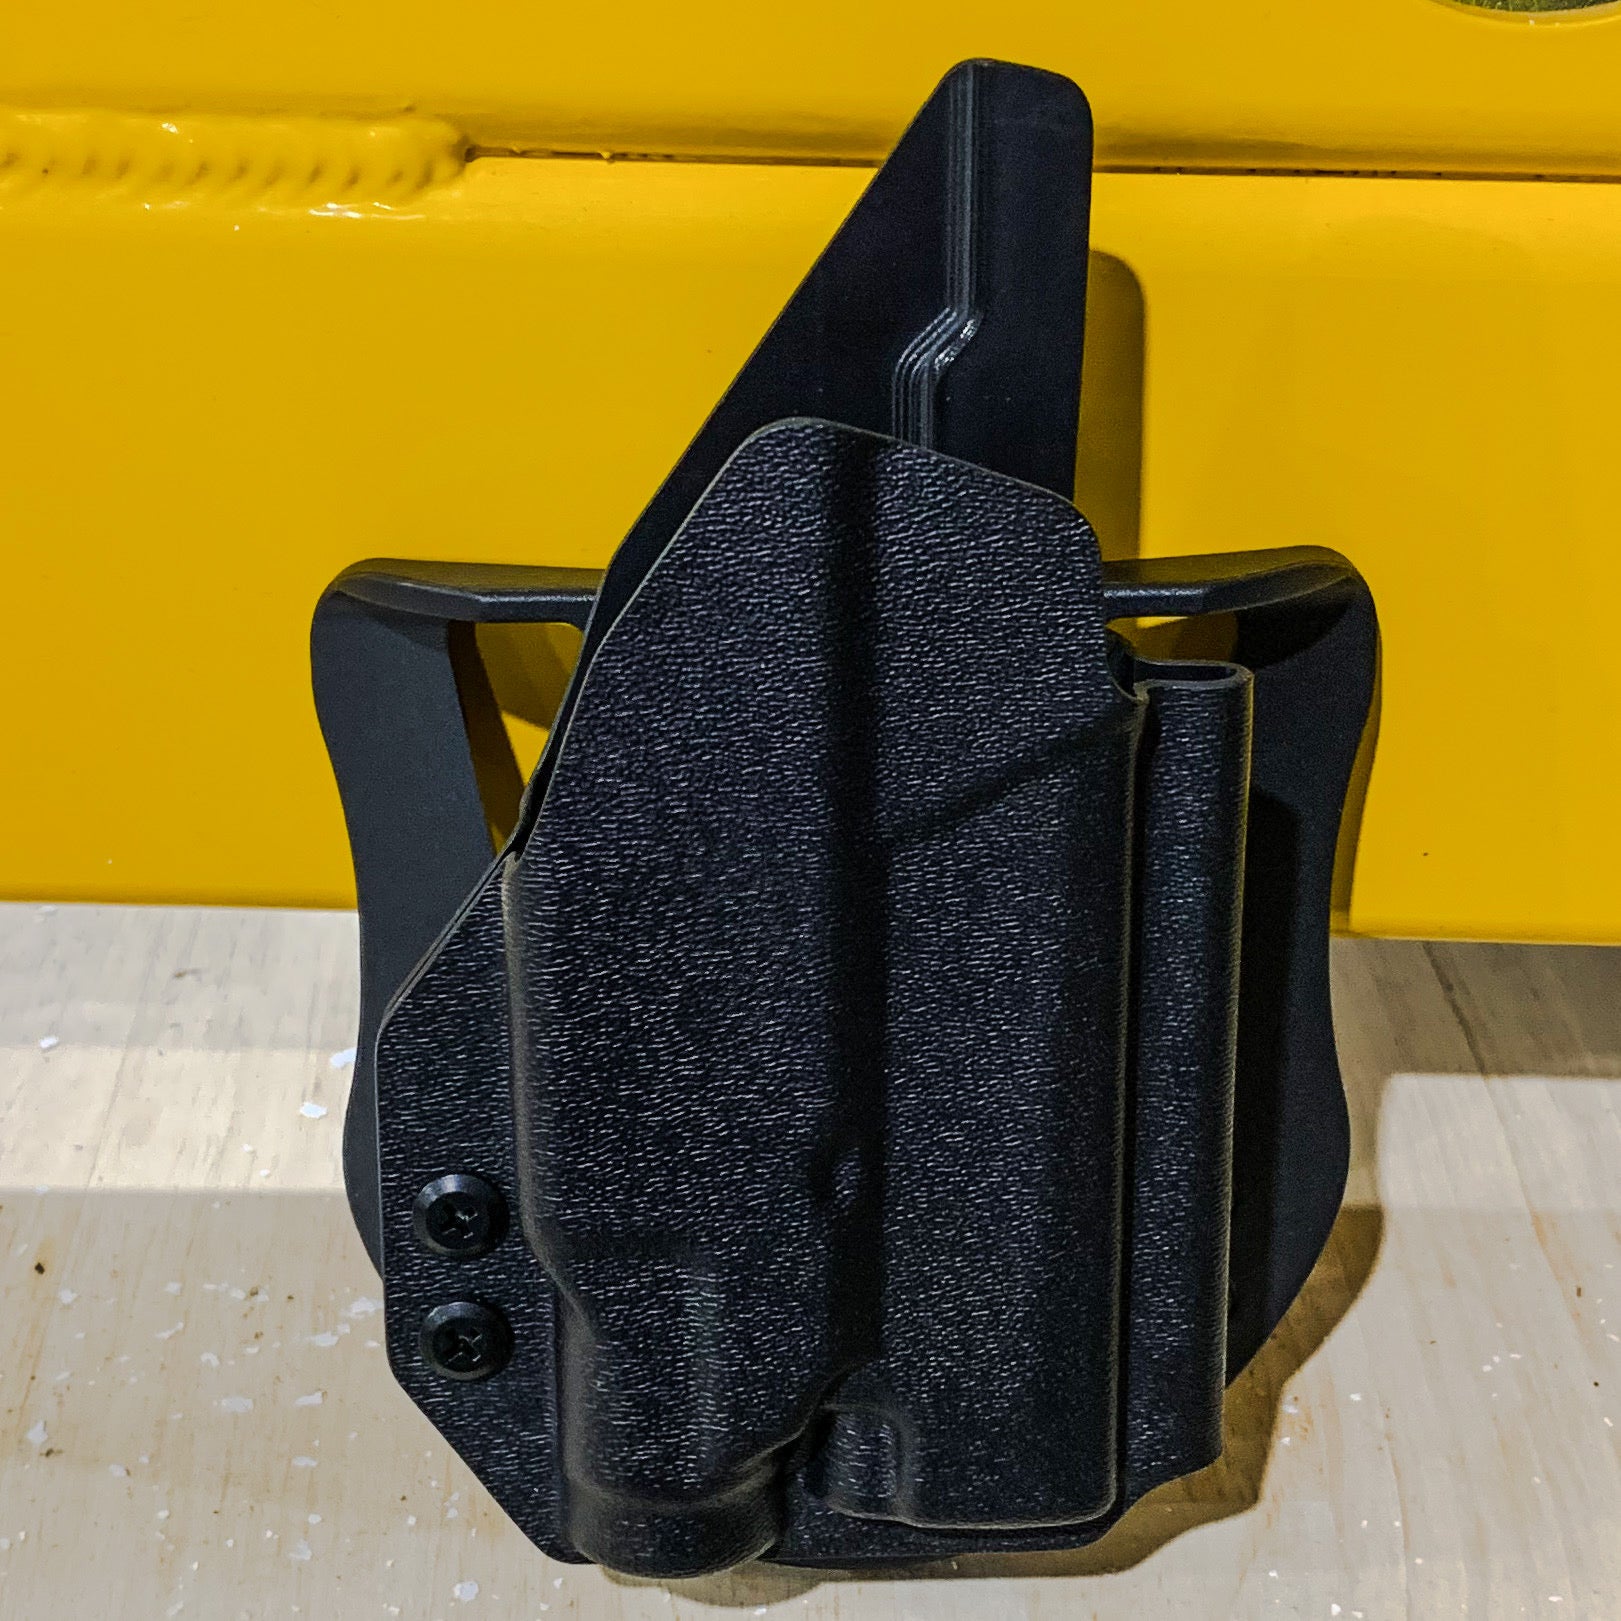 Outside Waistband Holster designed to fit the Sig Sauer P365XL pistol with the Streamlight TLR-7 Sub light mounted to the handgun. Full sweat guard, adjustable retention, minimal material and smooth edges to reduce printing. Made in the USA.